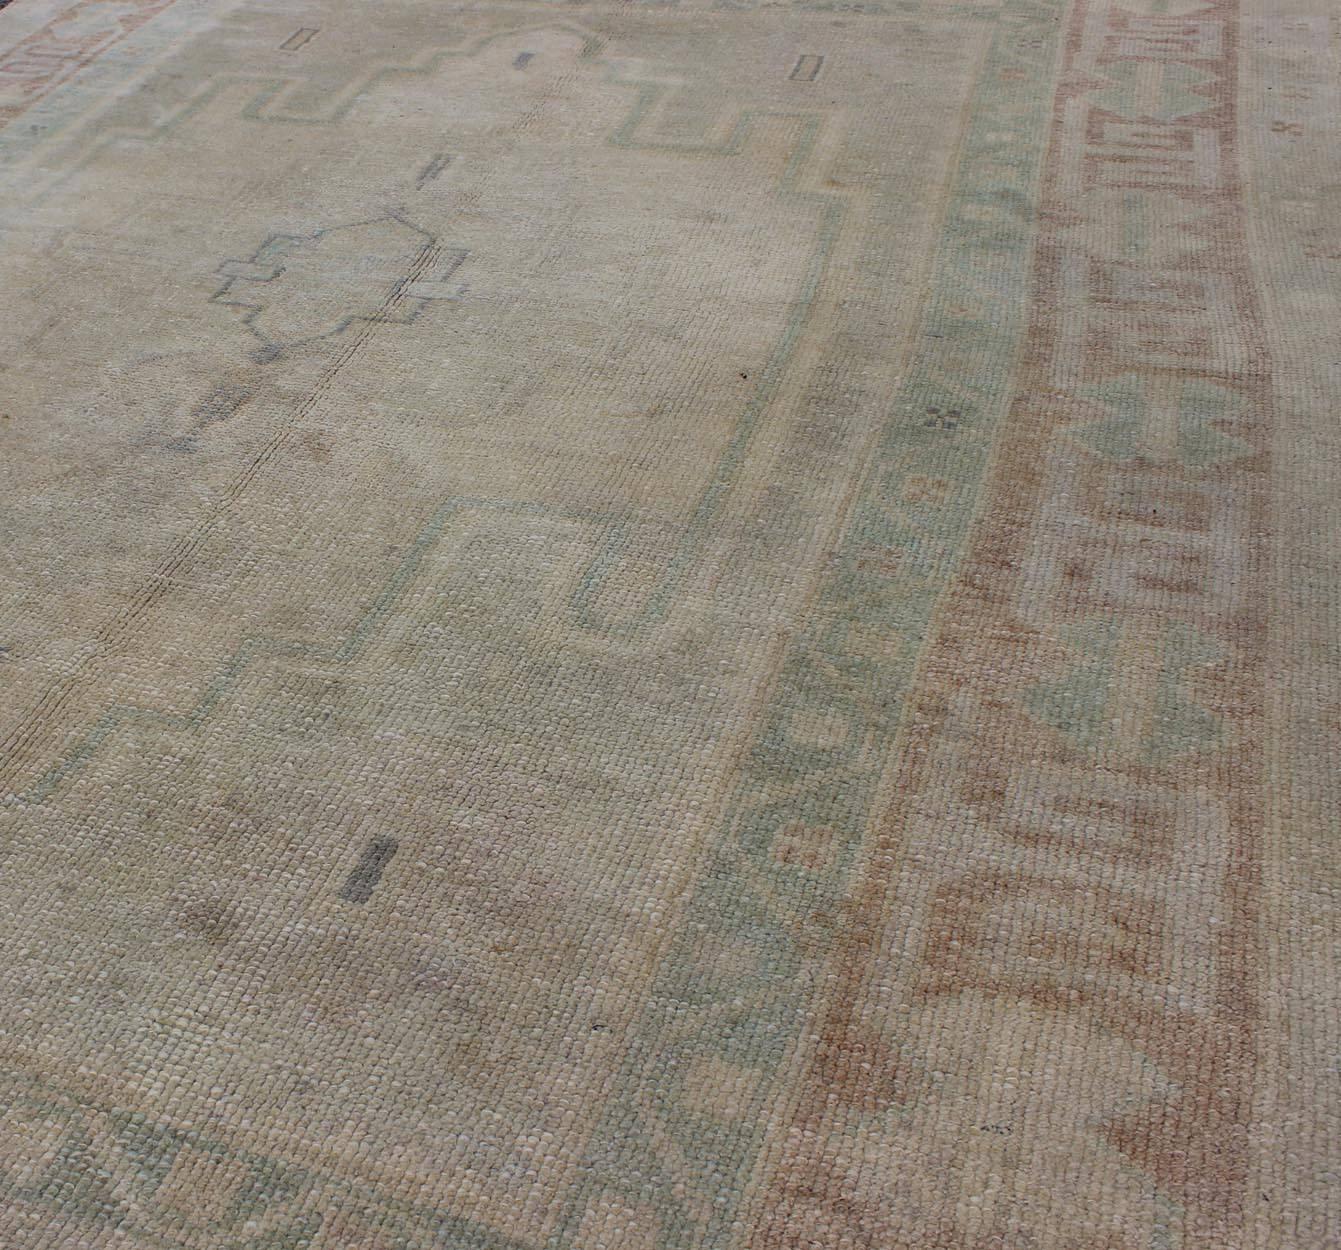 20th Century Pale Color Turkish Oushak Rug with Geometric Motifs in Light Brown, Tan & Green For Sale